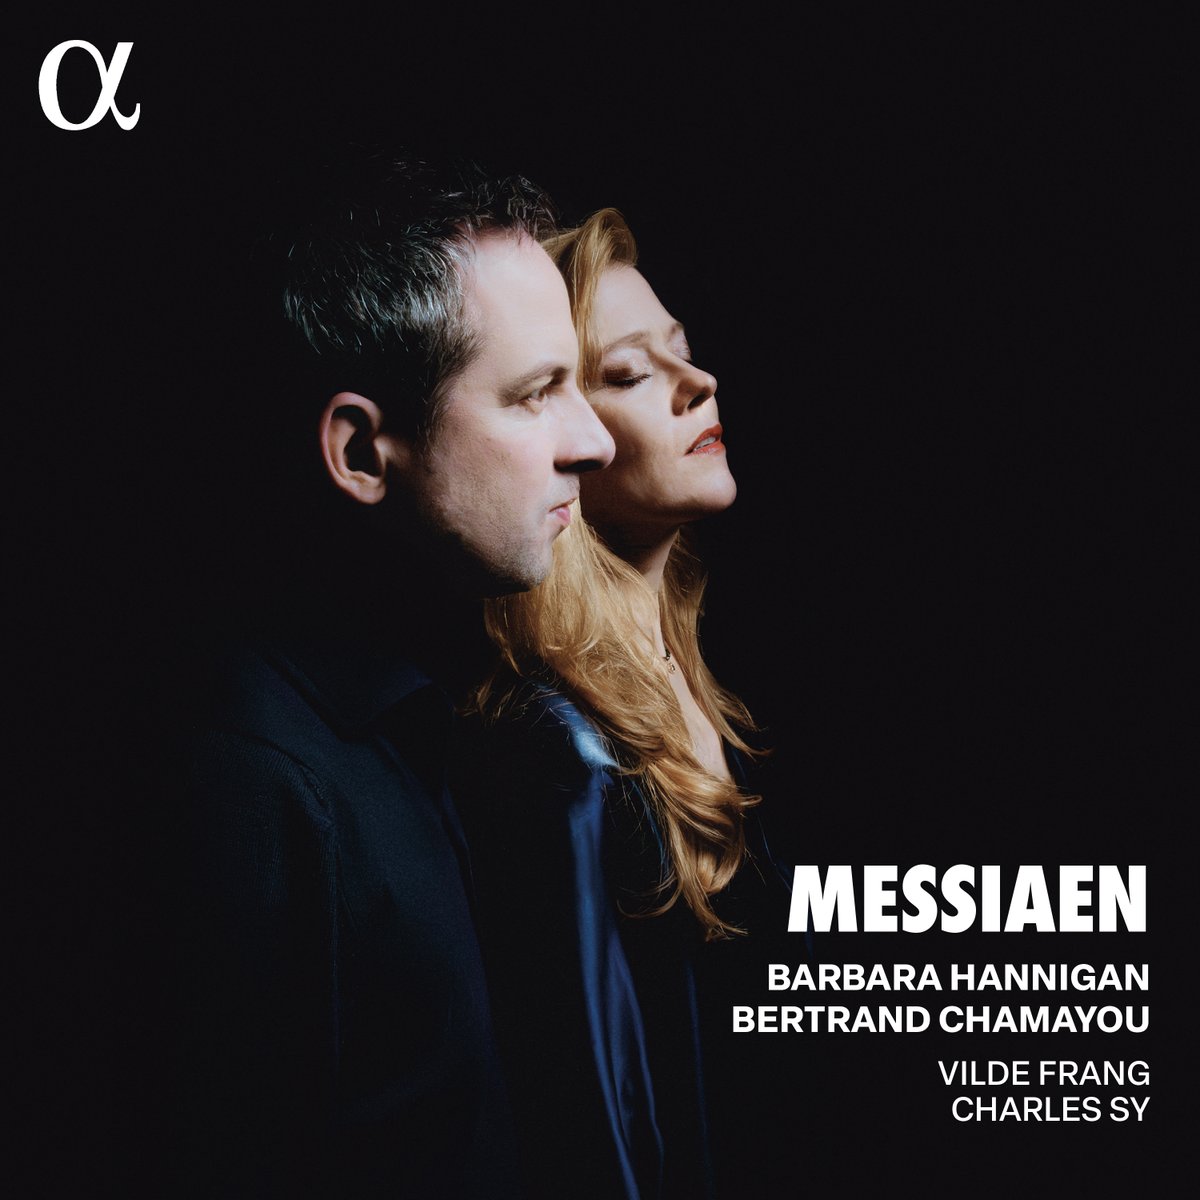 The Guardian 4**** 'beguiling, soft-edged intimacy' Messiaen to be released 24th May theguardian.com/music/article/… @alpha_classics @HanniganBarbara @ChamayouB @GdnClassical 📷